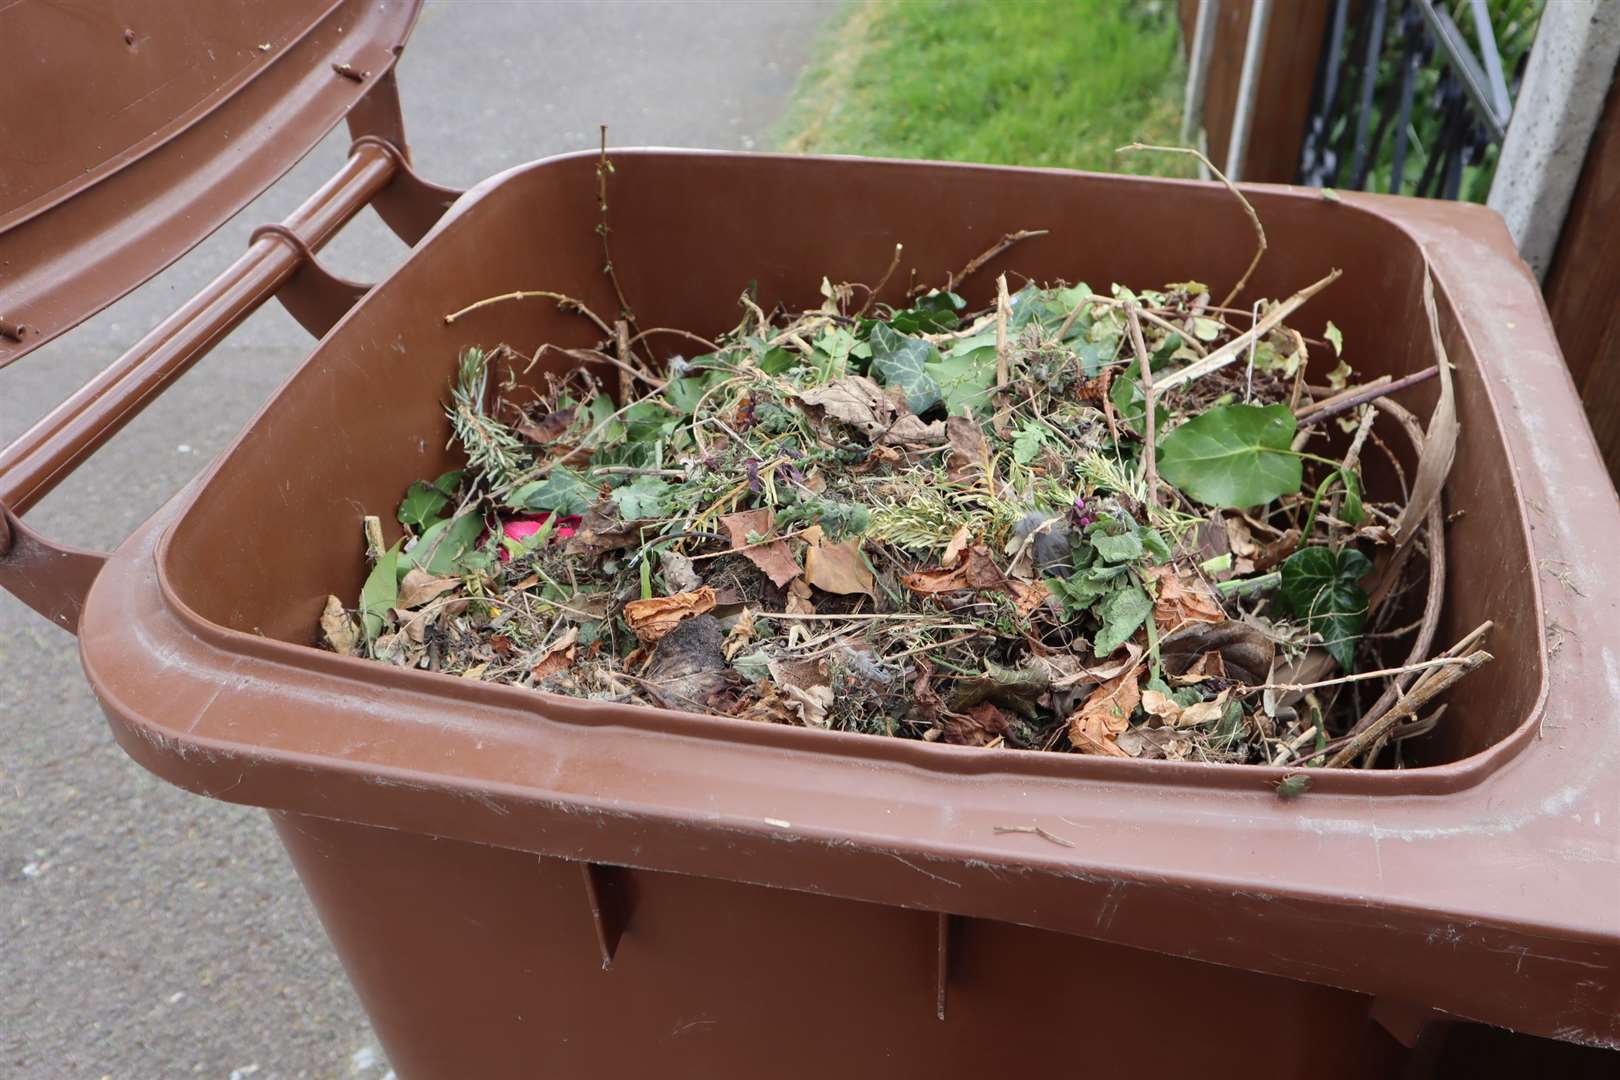 Brown bin collections for garden waste have been suspended in Swale